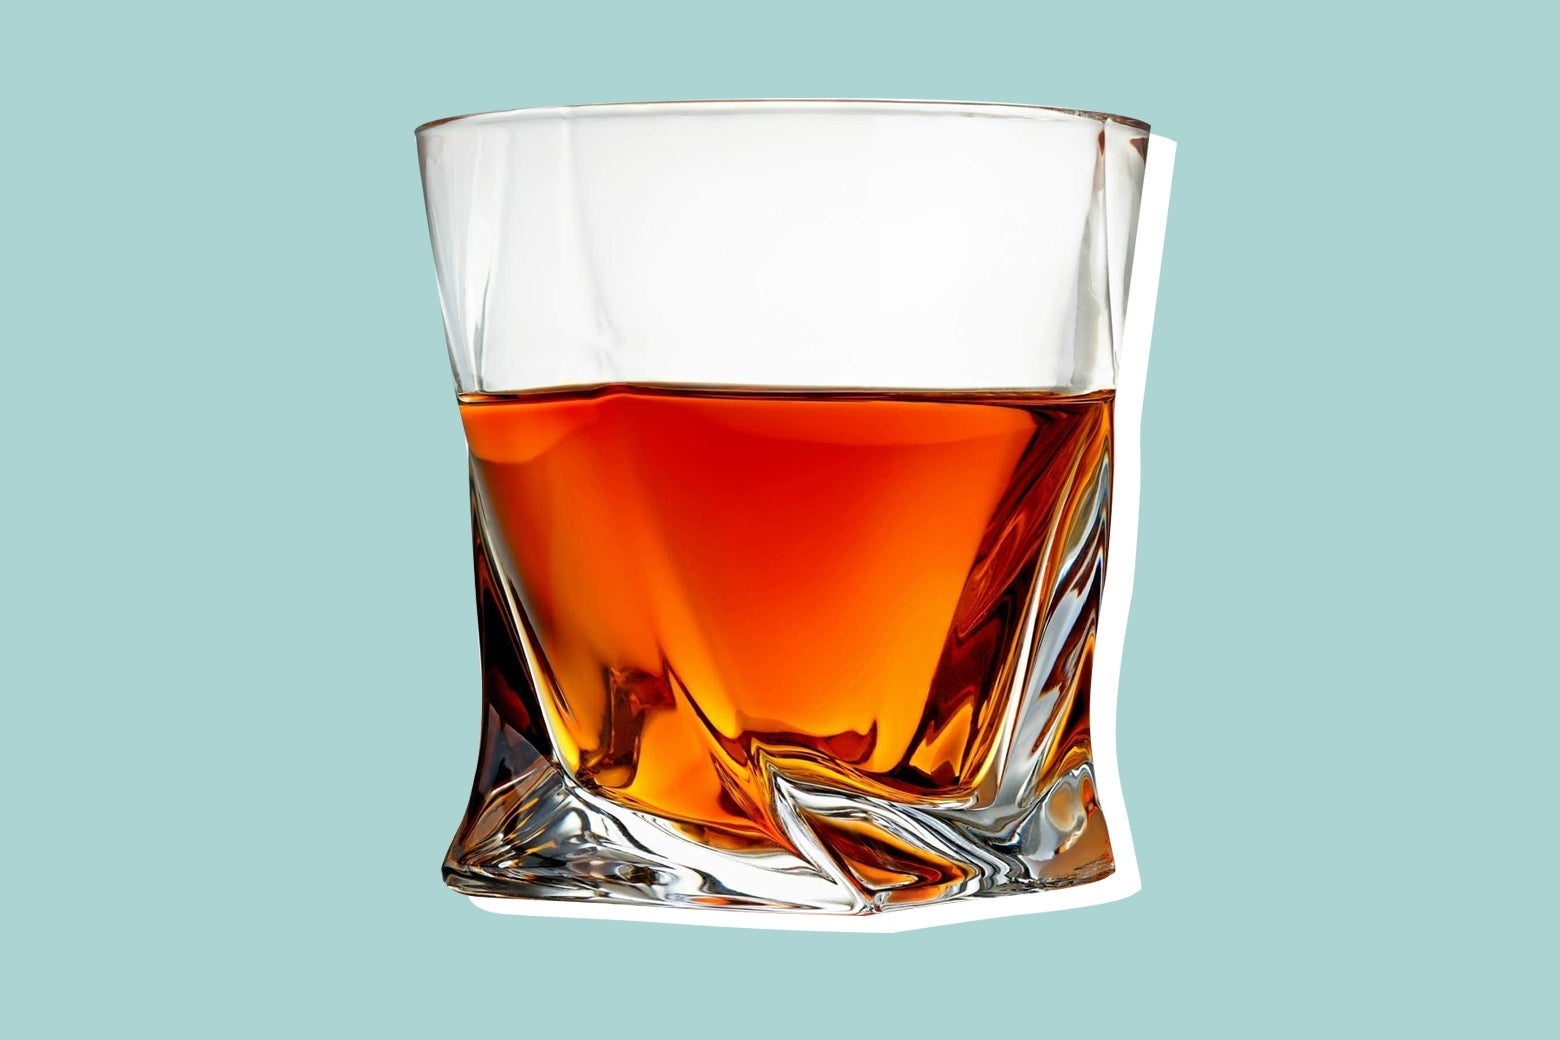 The Venero glass with whiskey in it.